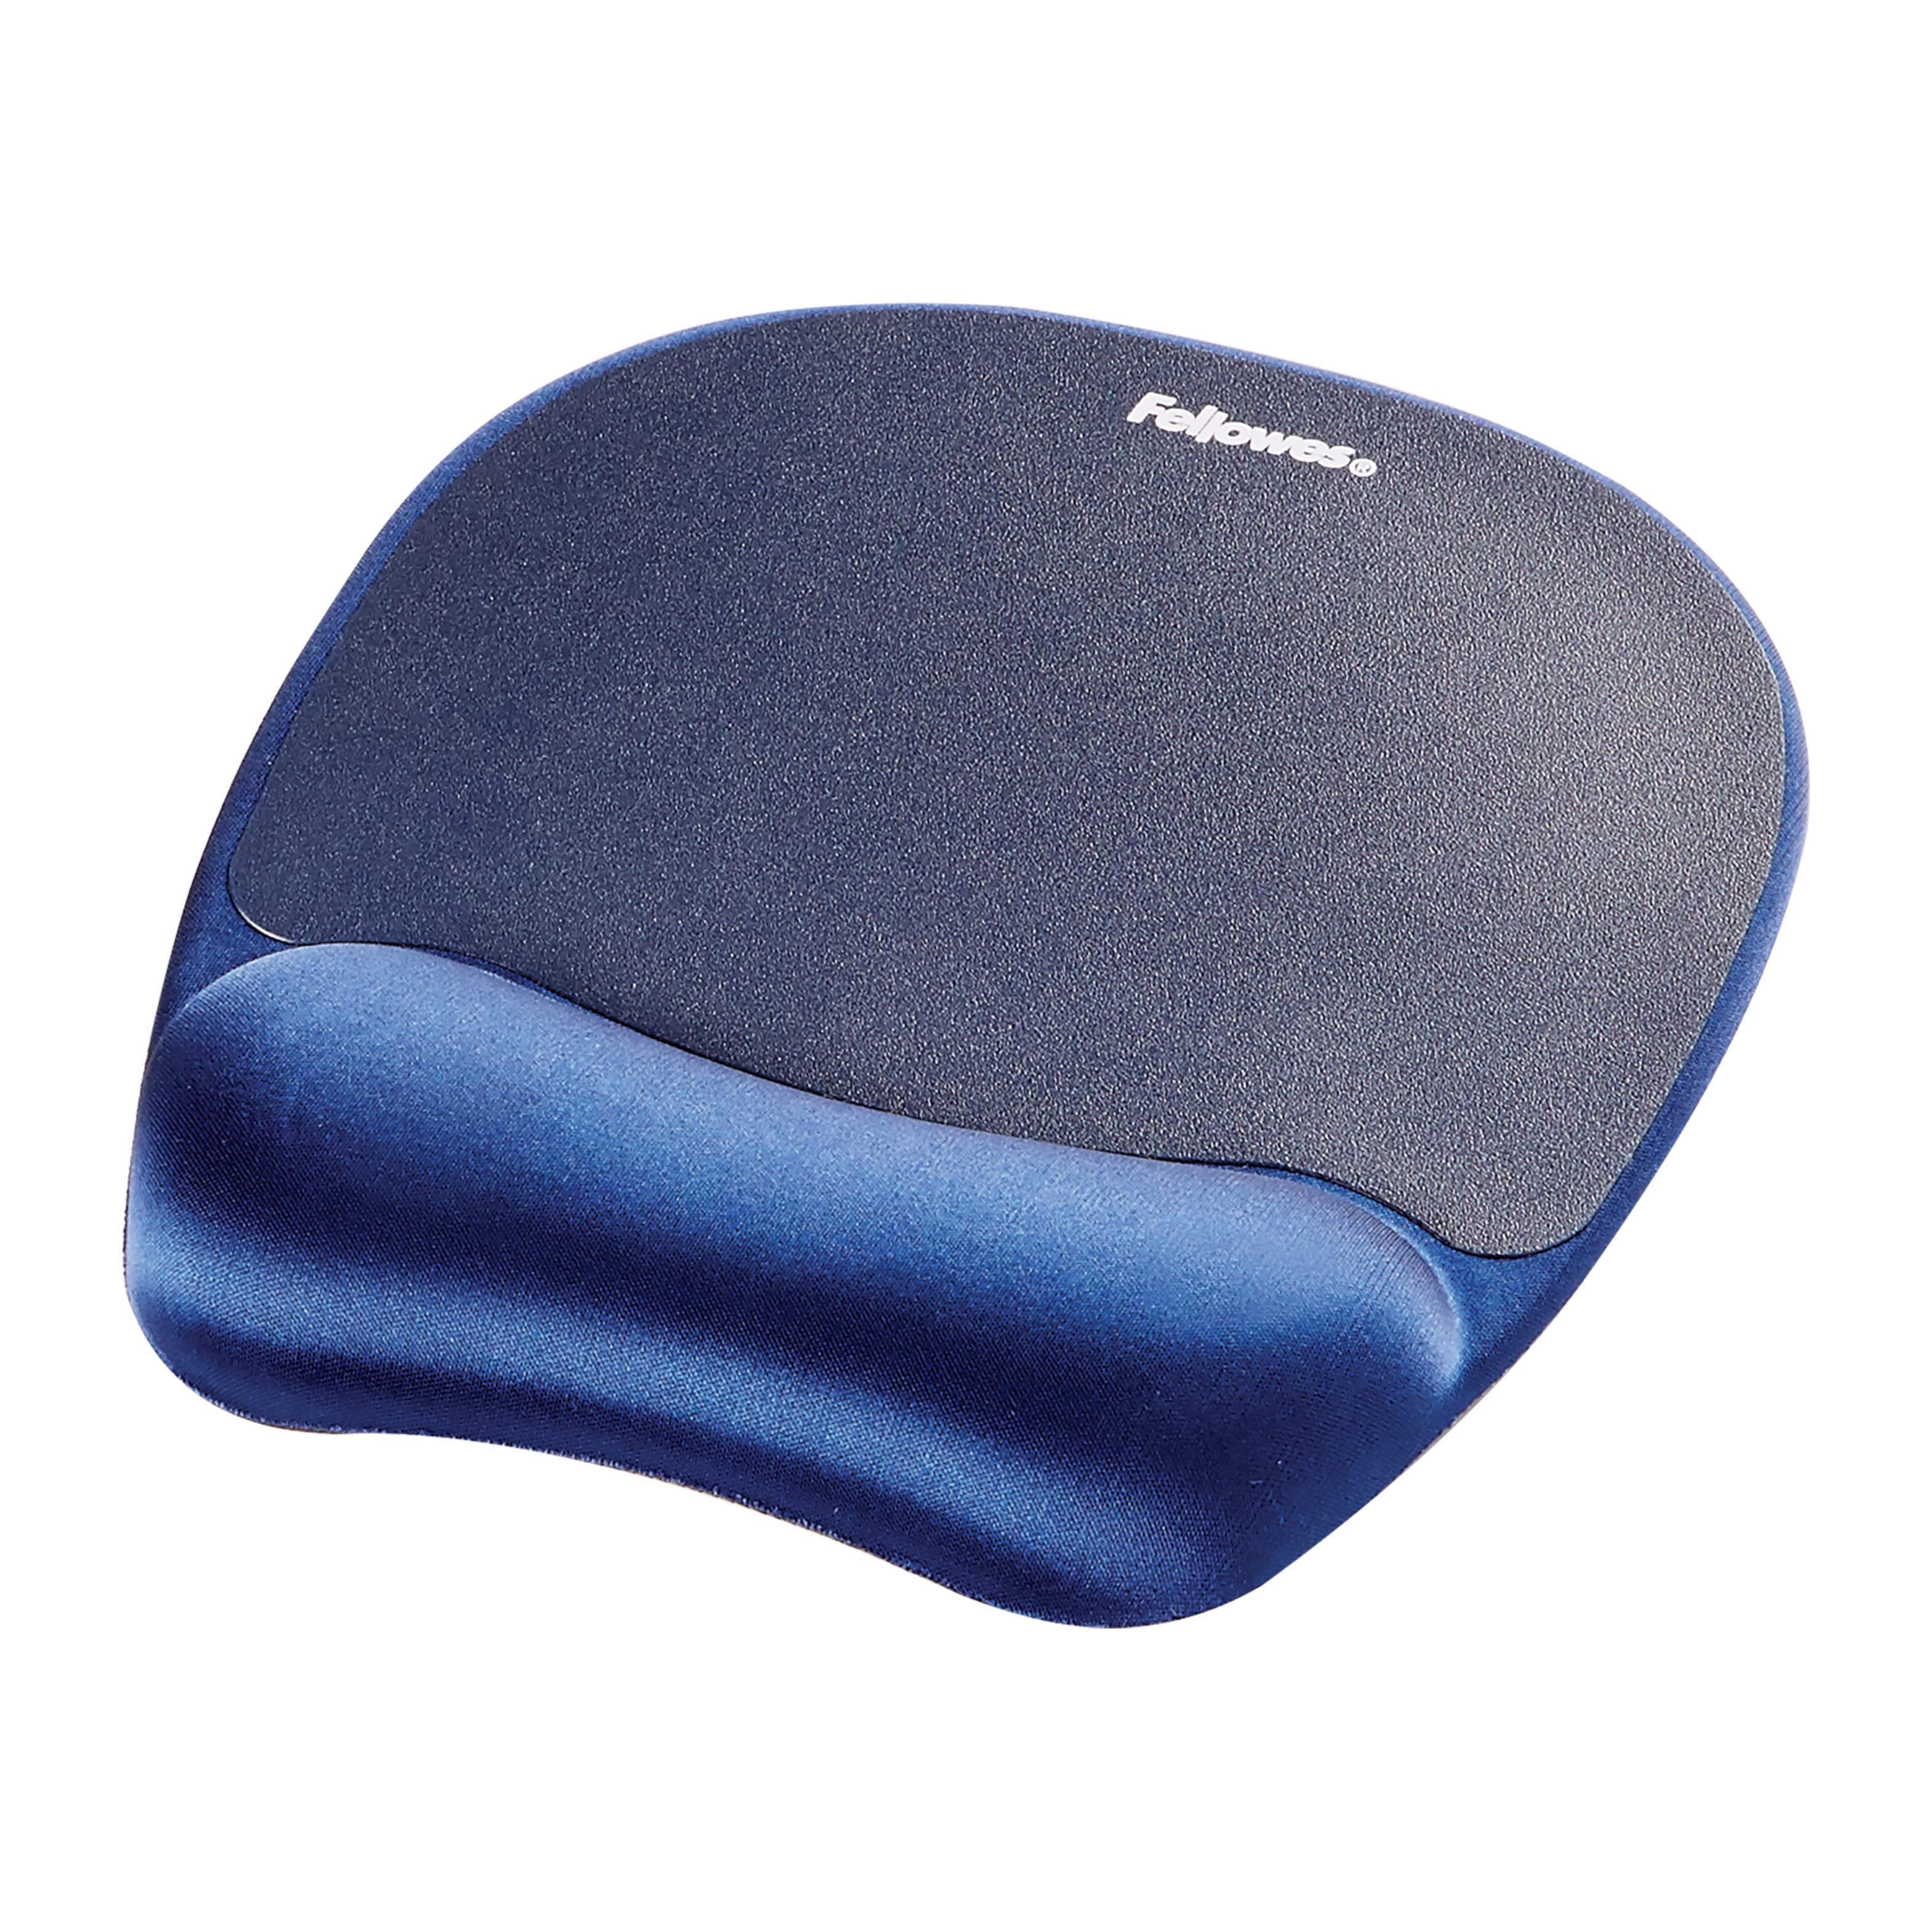 Fellowes 9172801 Mouse Pad